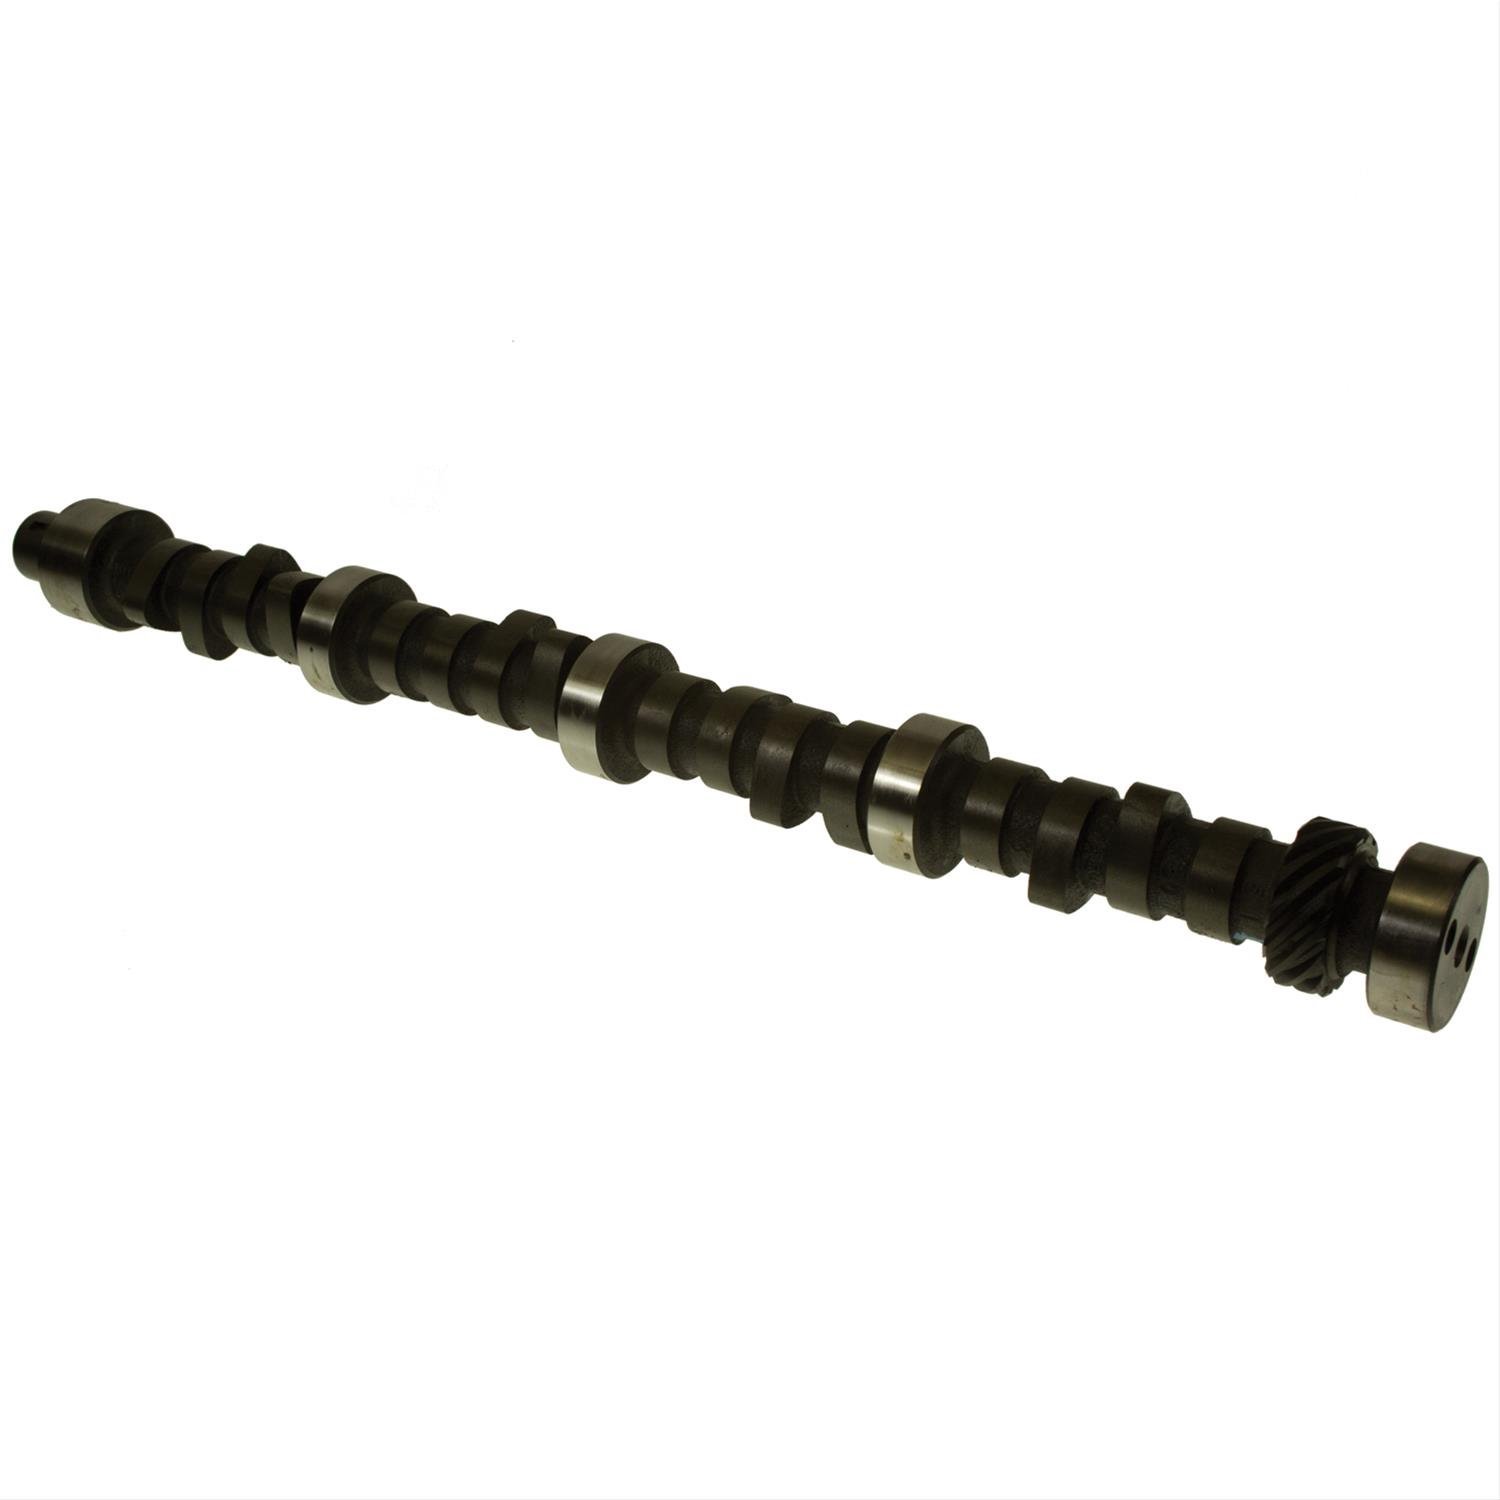 OEM Replacement Camshaft for Select 1963-1976 GM Models with 5.7L, 6.4L, 6.6L, 6.9L, 7L, 7.5L Engines